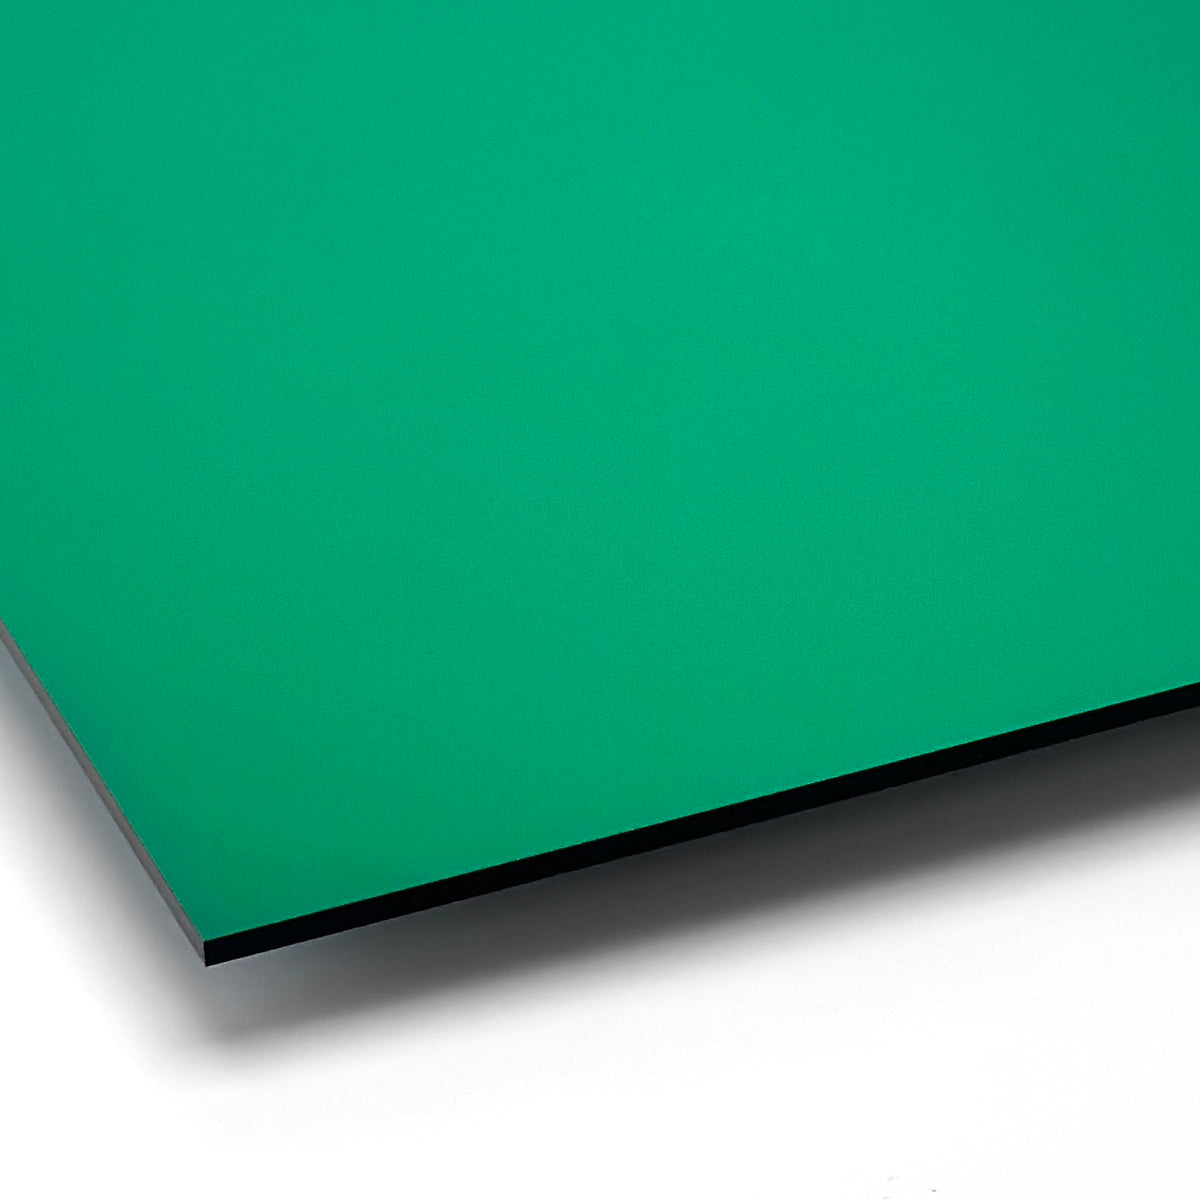 Mirror Green Acrylic with laser cutting & printing - 300x200mm